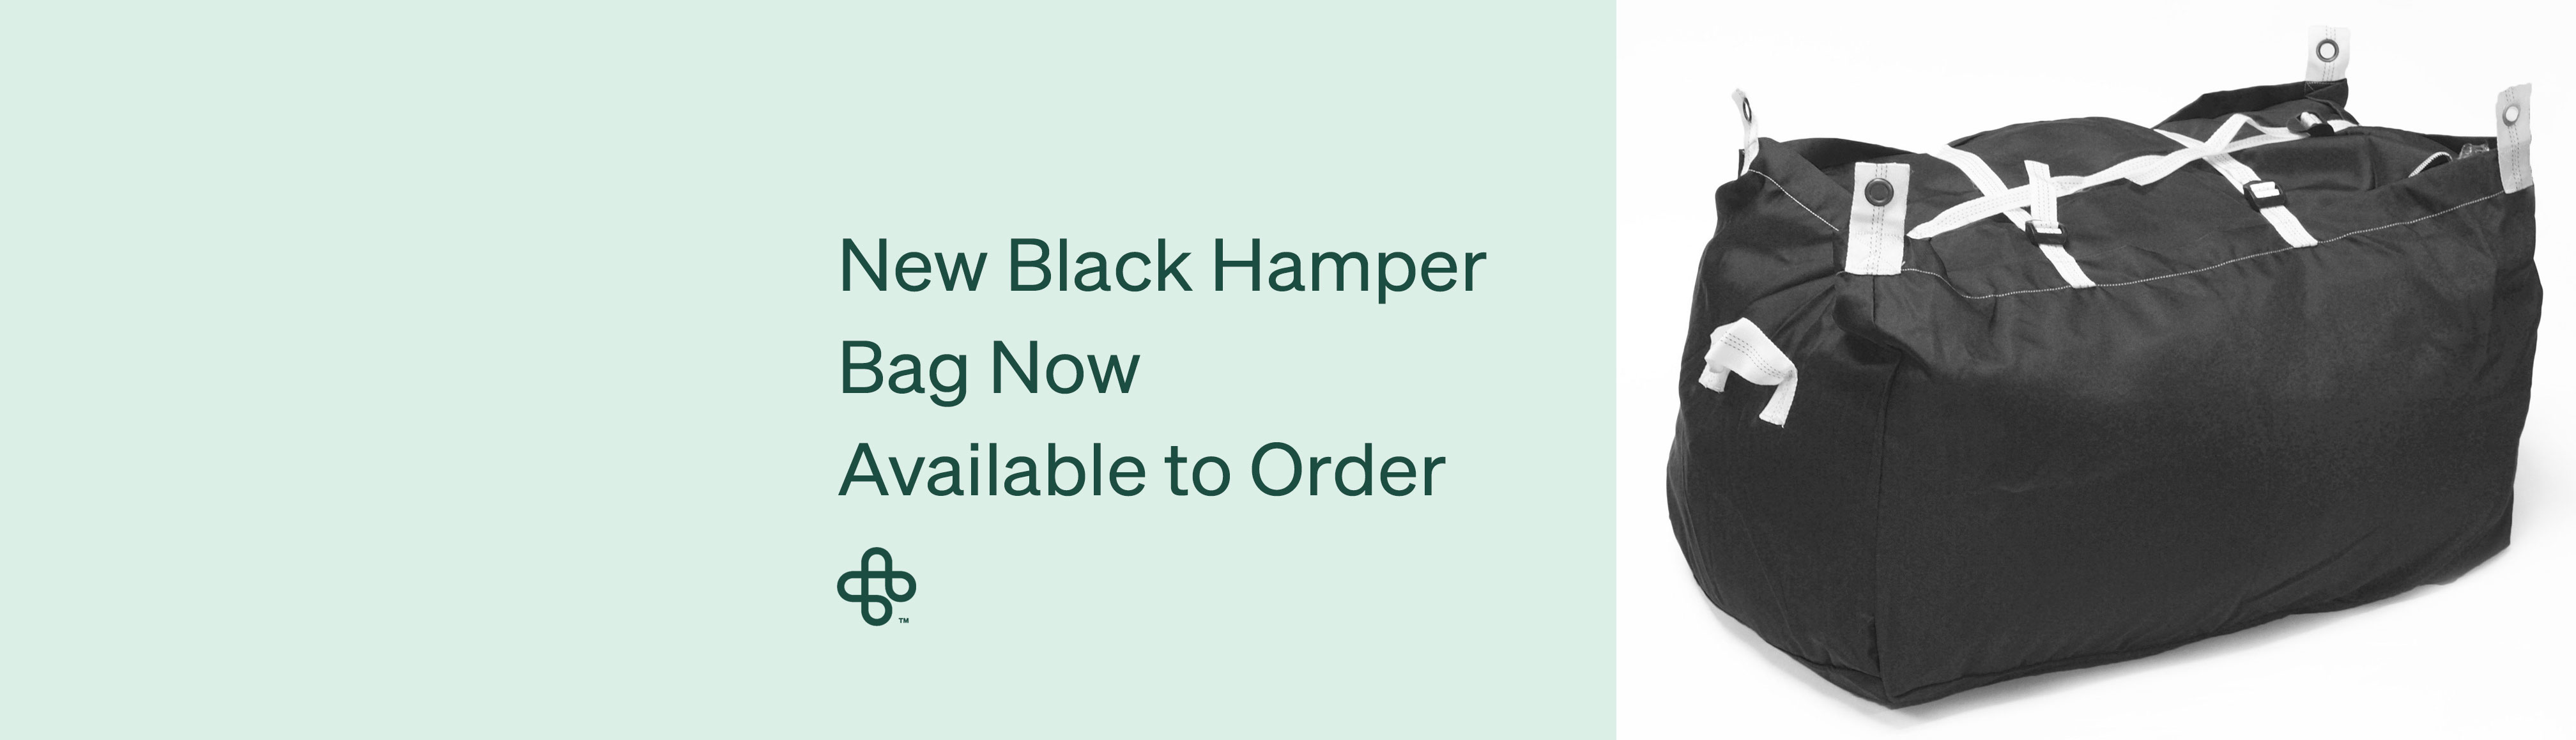 New Black Hamper Bag Now Available to Order